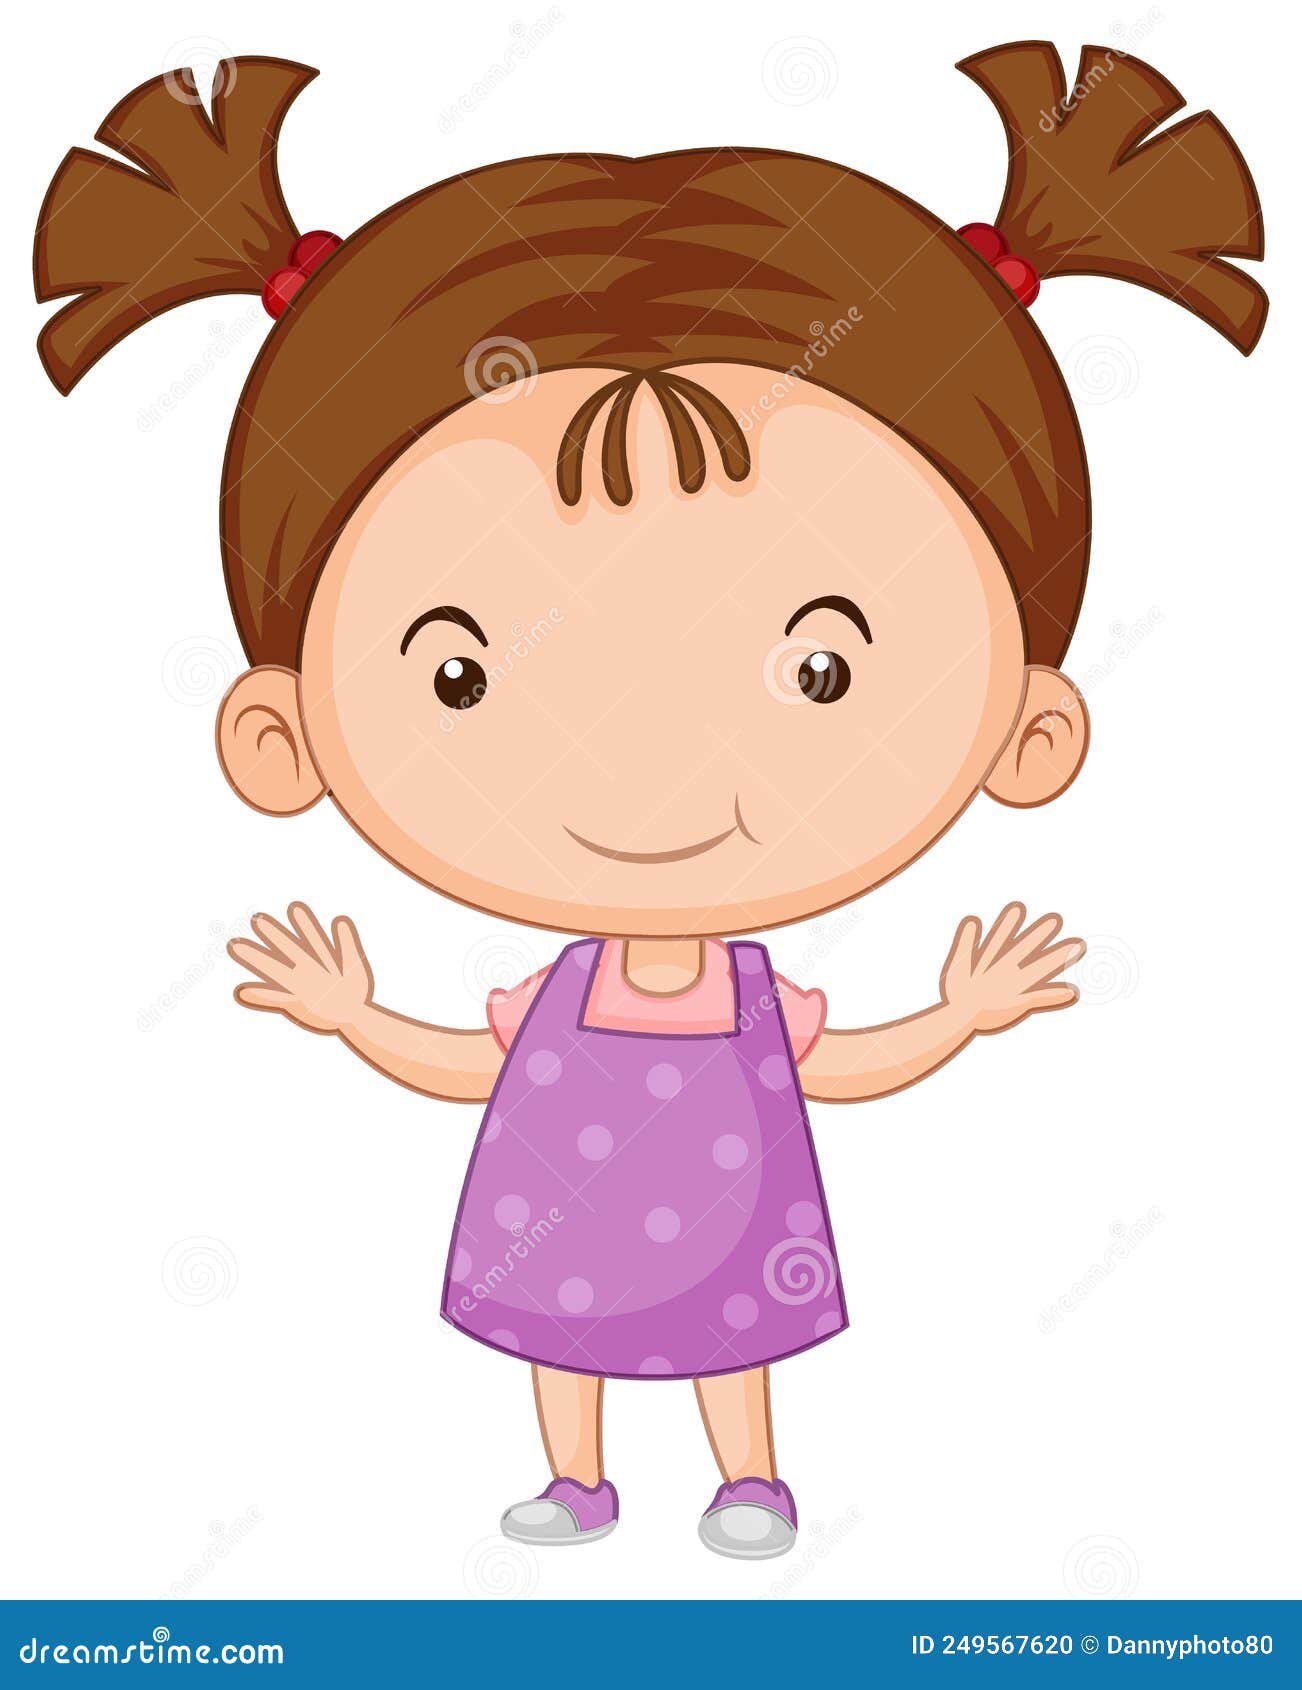 Cute Girl Cartoon Character on White Background Stock Vector ...